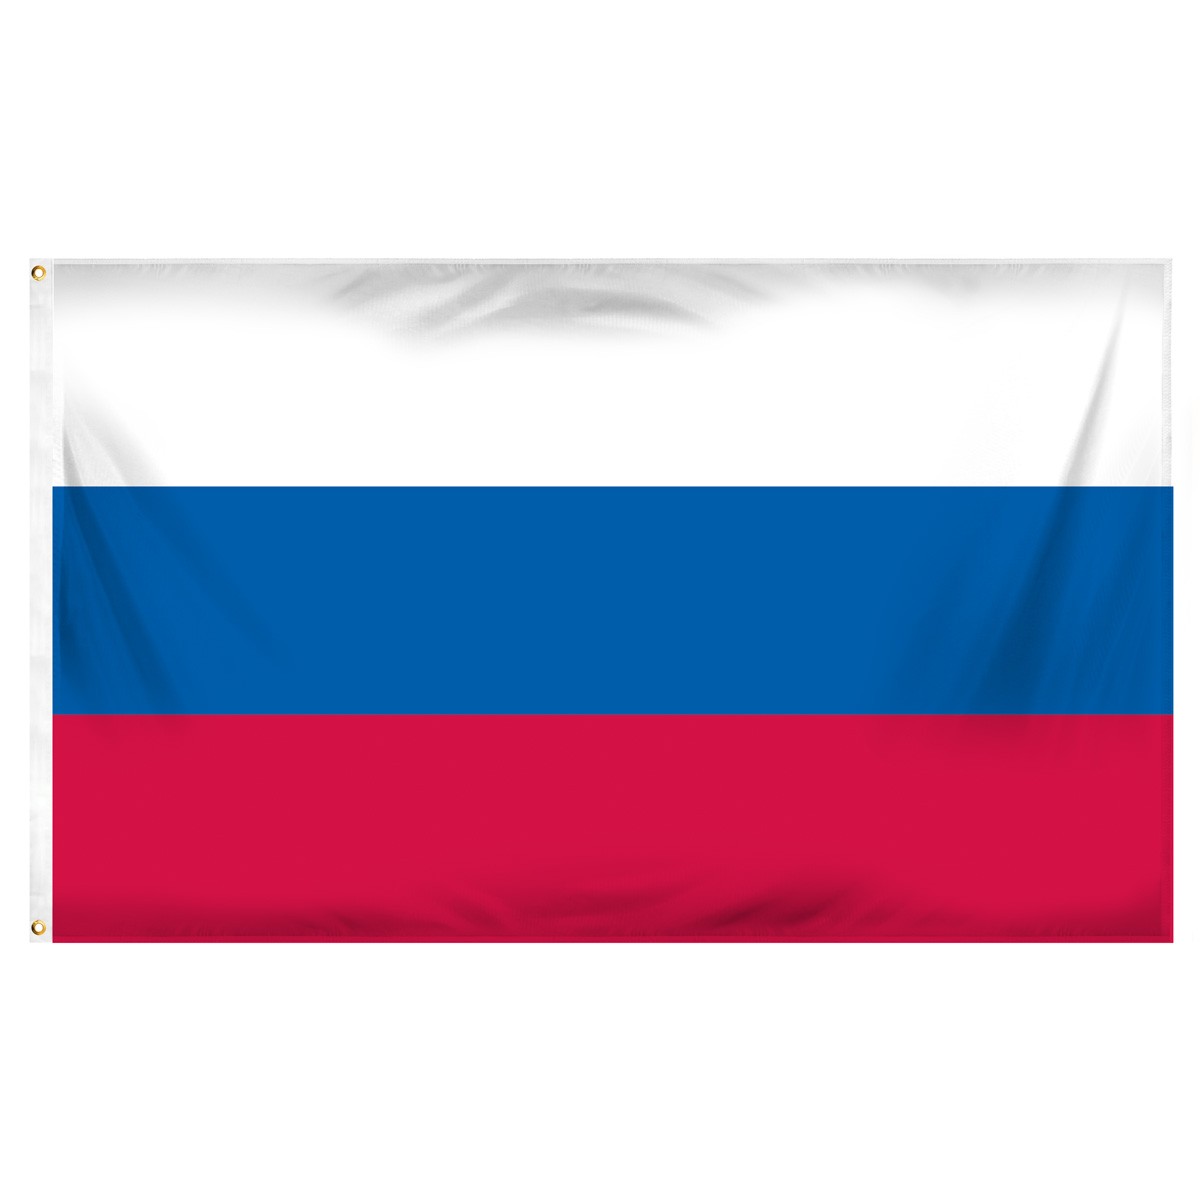 Russia Submit Flags and Flags